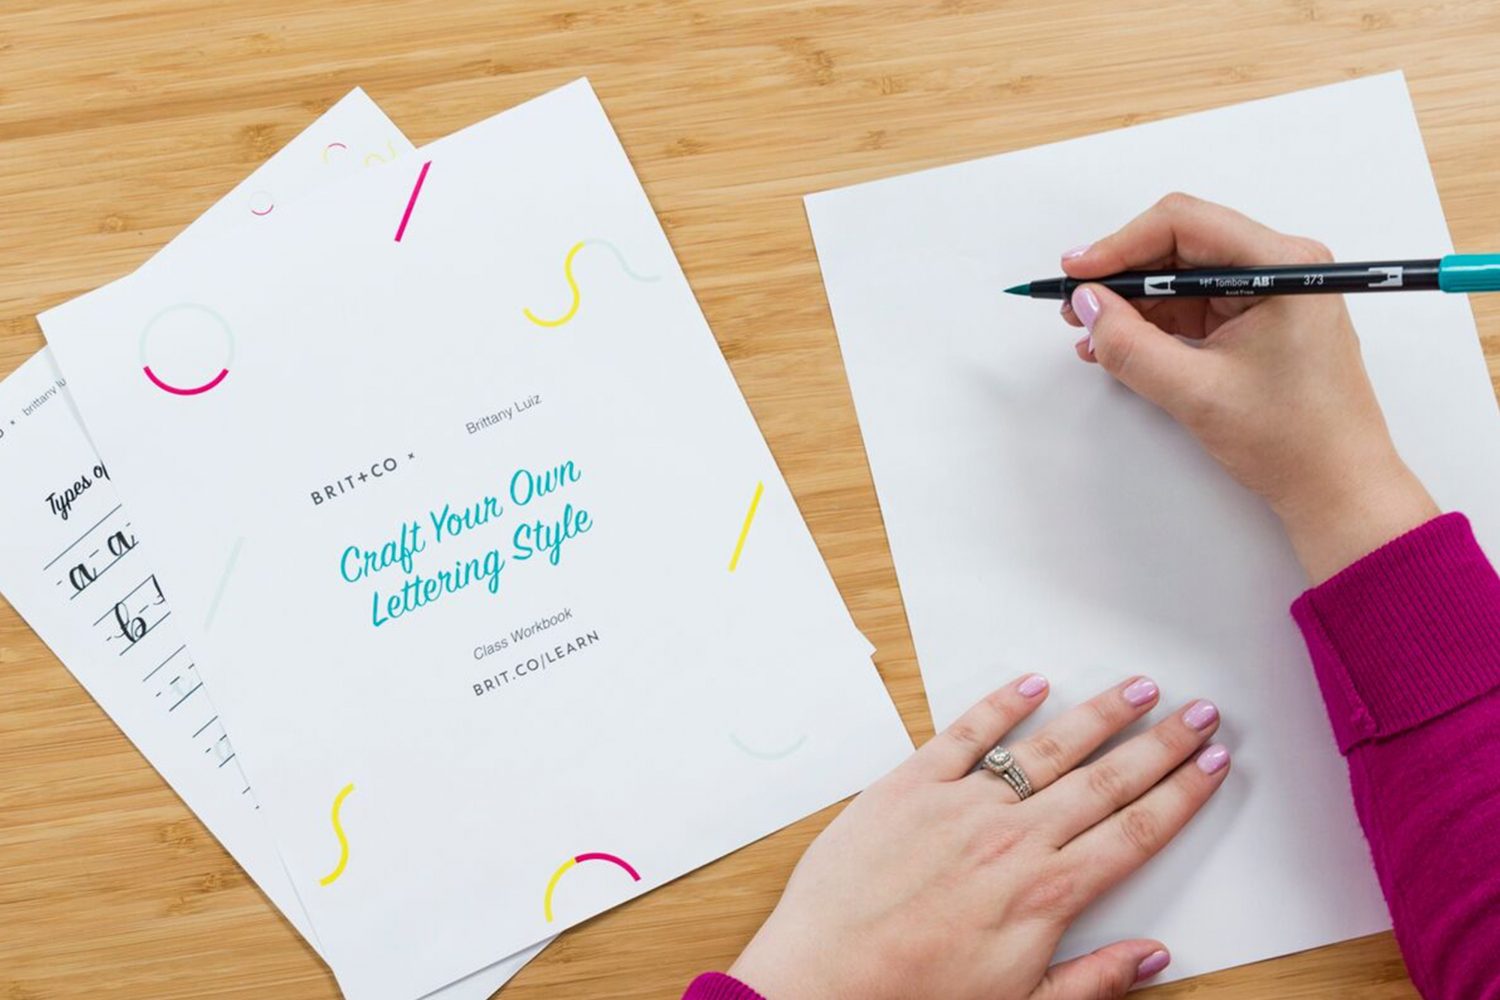 Take our new lettering class on @britandco today and learn how to craft your own lettering style!